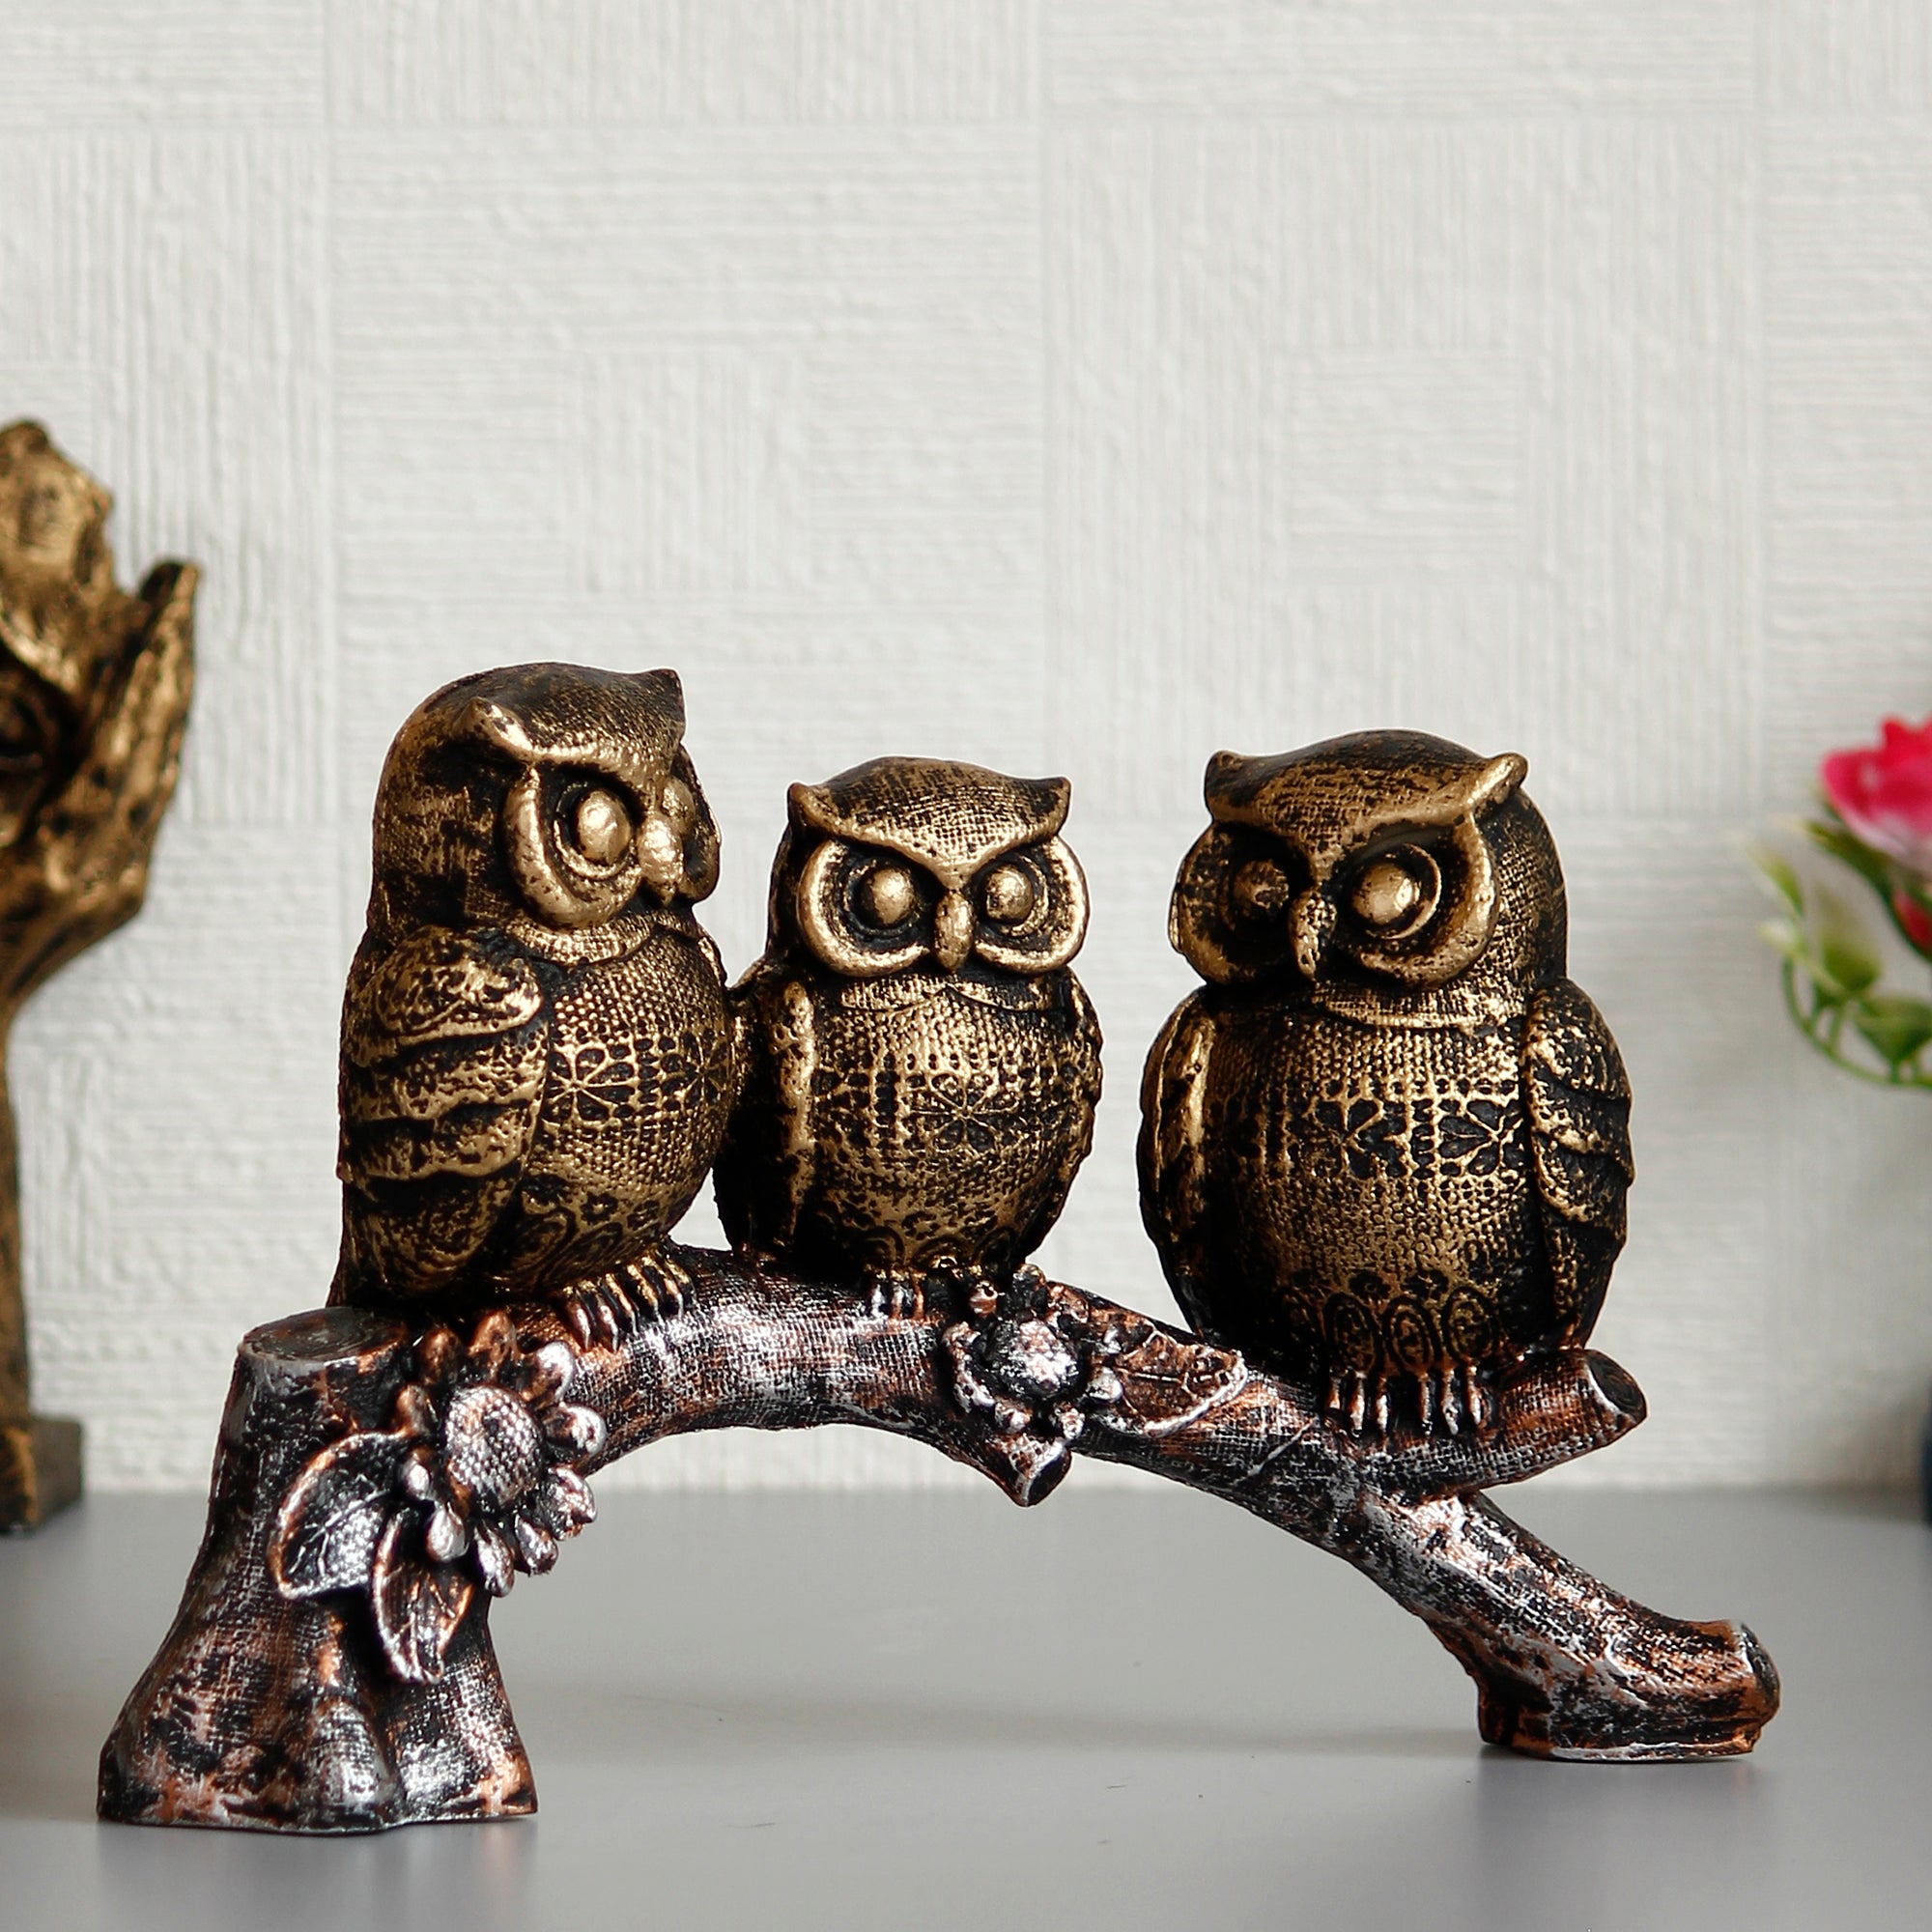 3 Owl Sitting on Branch Antique Finish Handcrafted Polyresin Decorative Showpiece 1